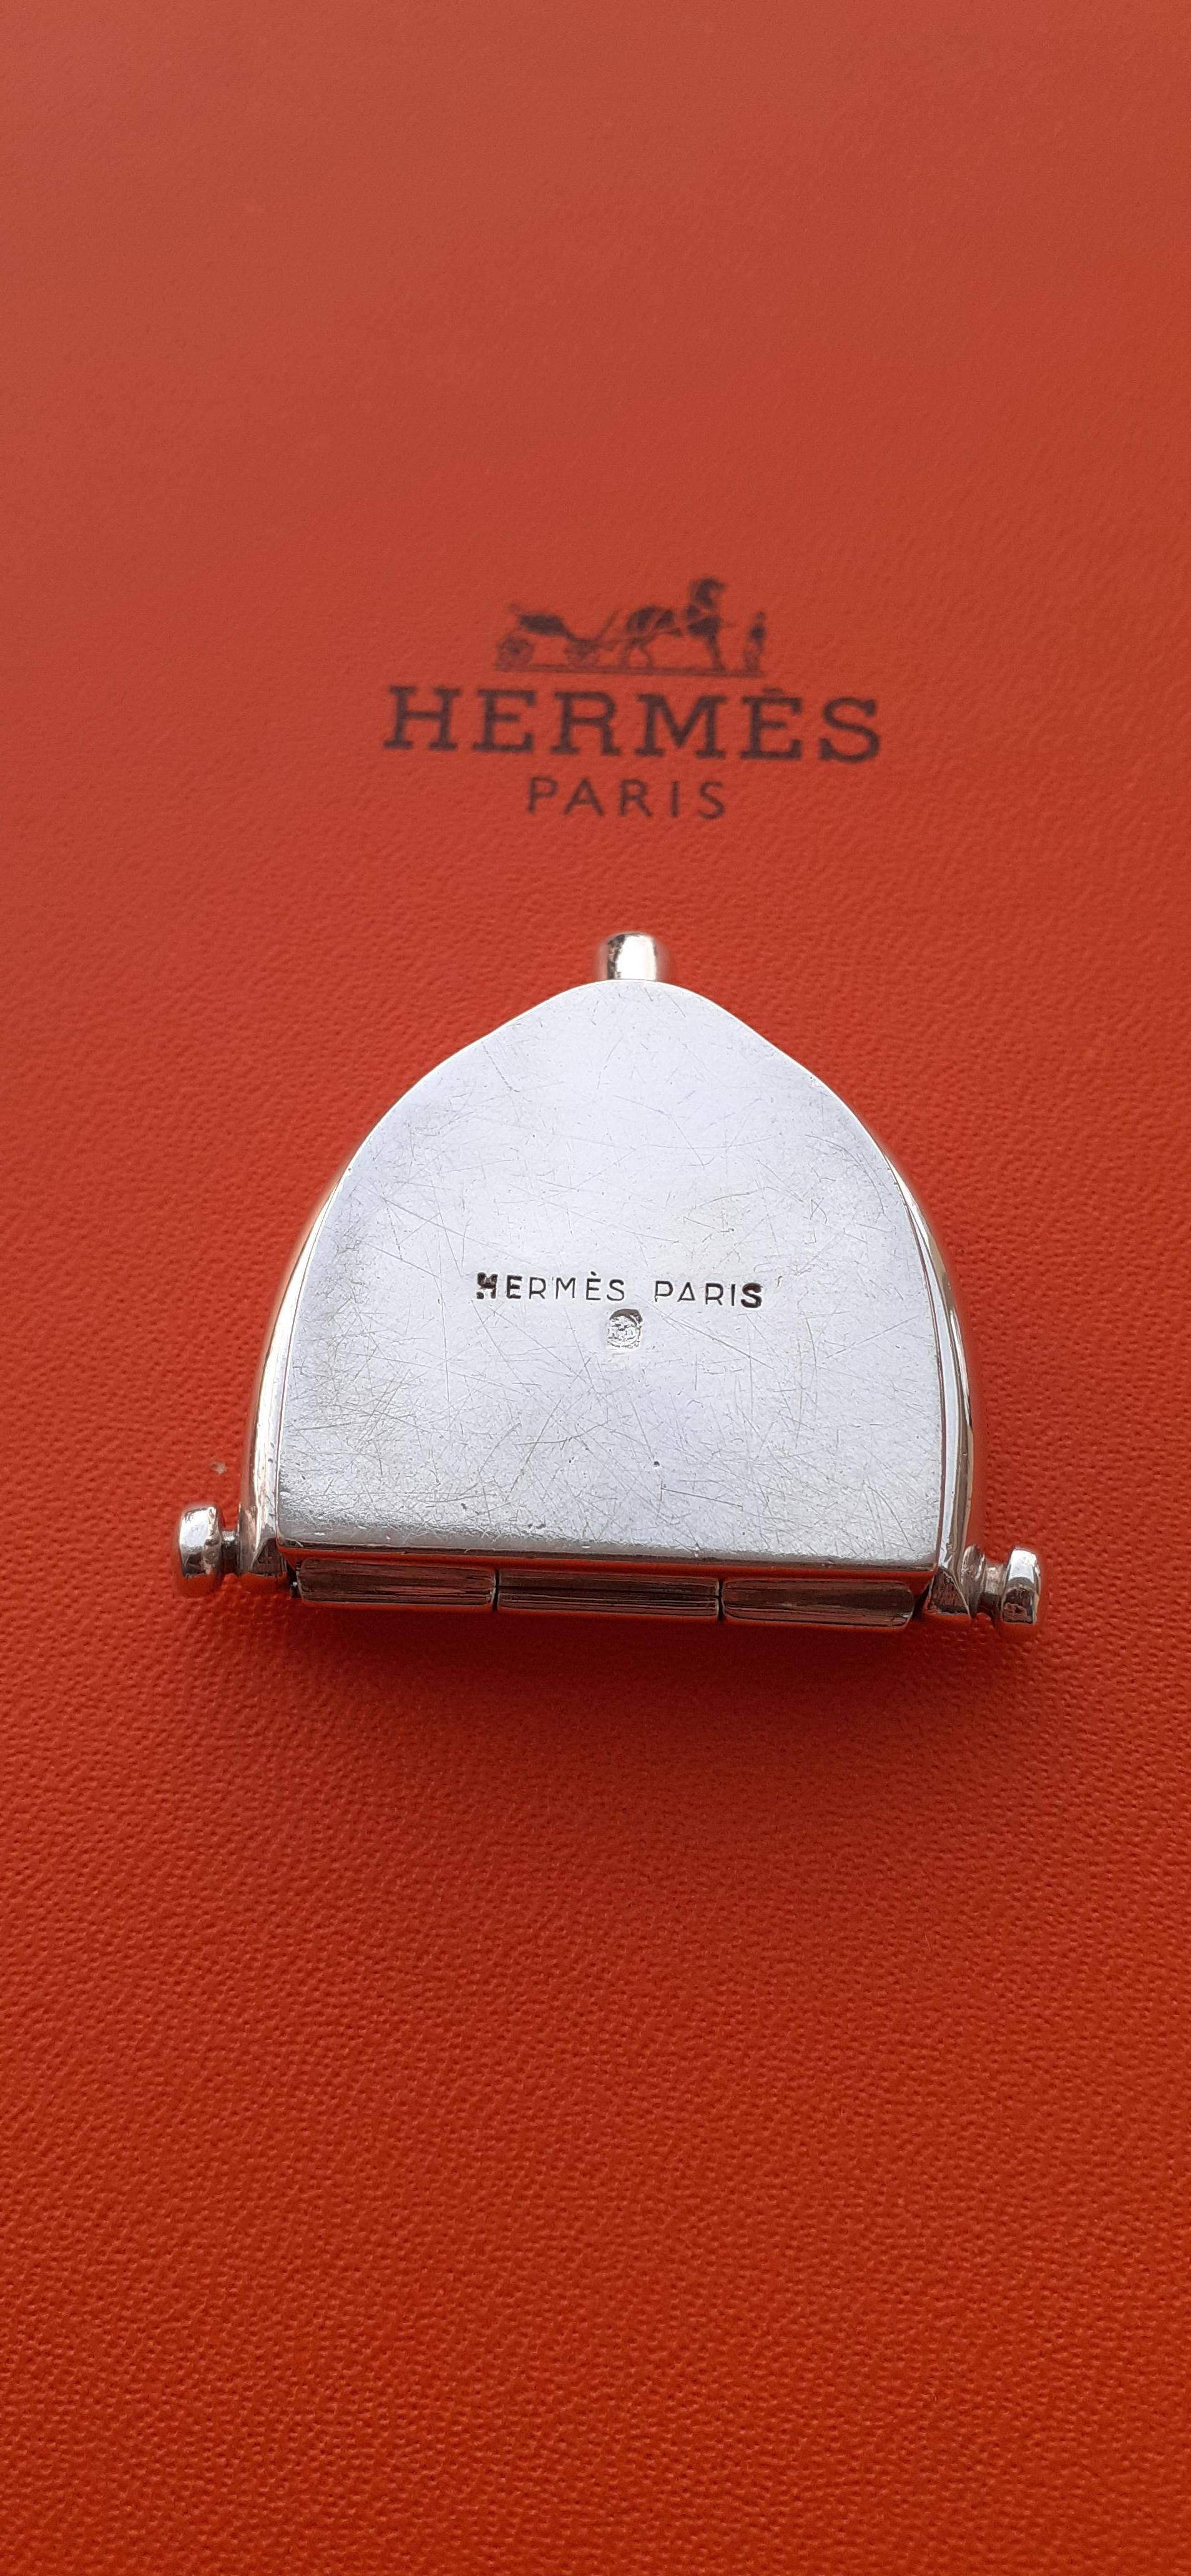 Exceptional Hermès Guilloche Spur Shaped Pill Box By Ravinet d'Enfert For Sale 1